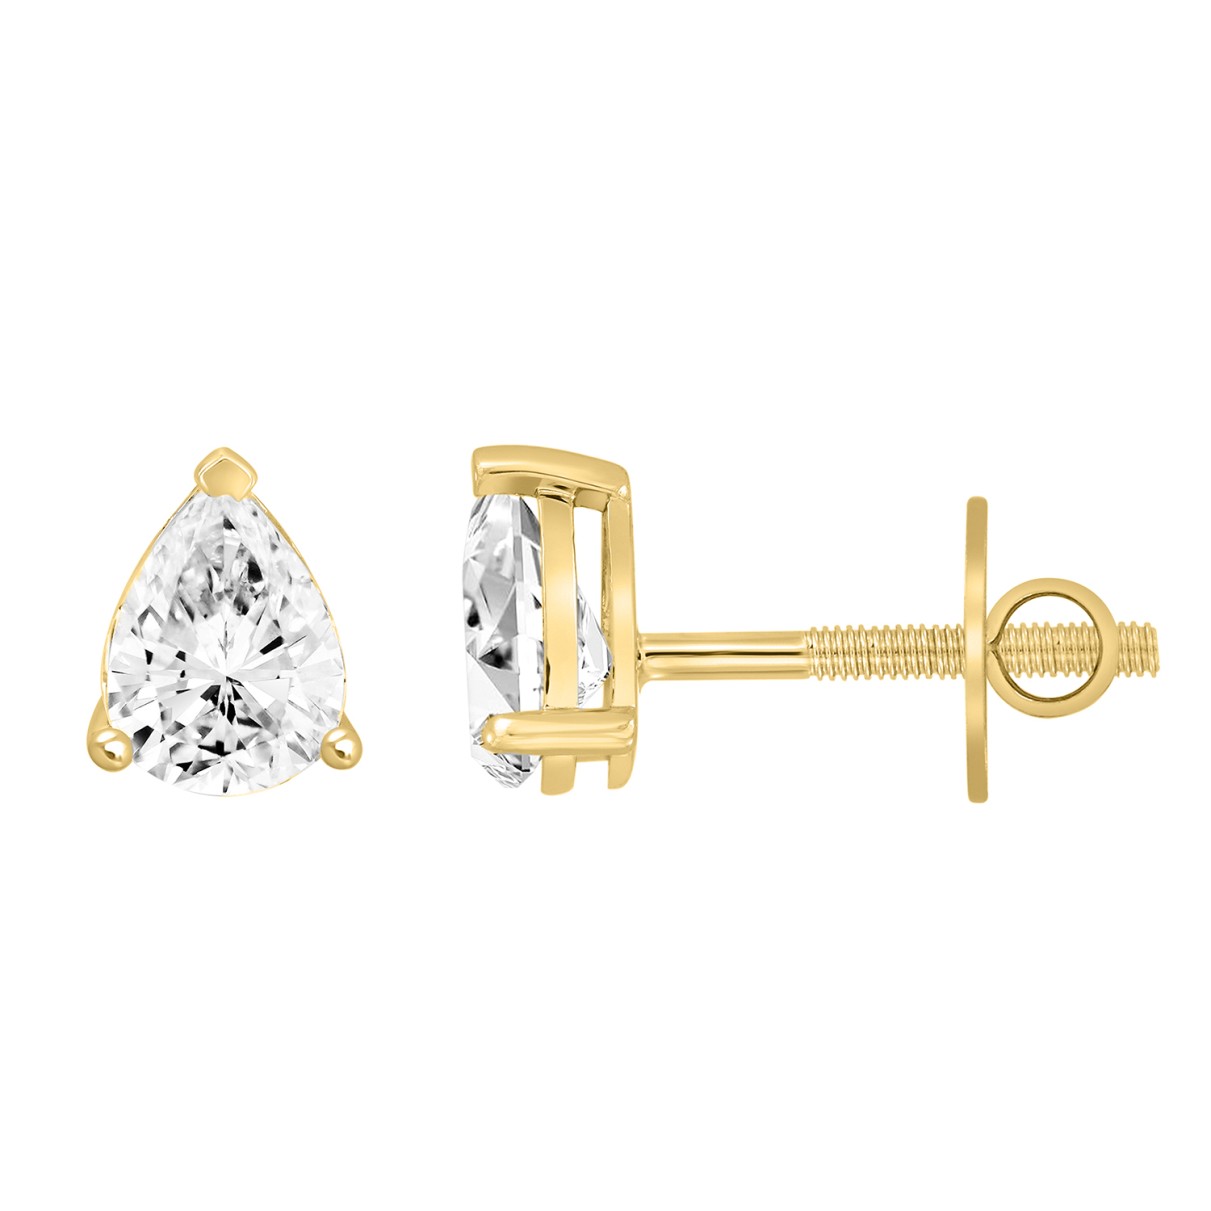 LADIES SOLITAIRE EARRINGS  2CT PEAR DIAMOND 14K YELLOW GOLD